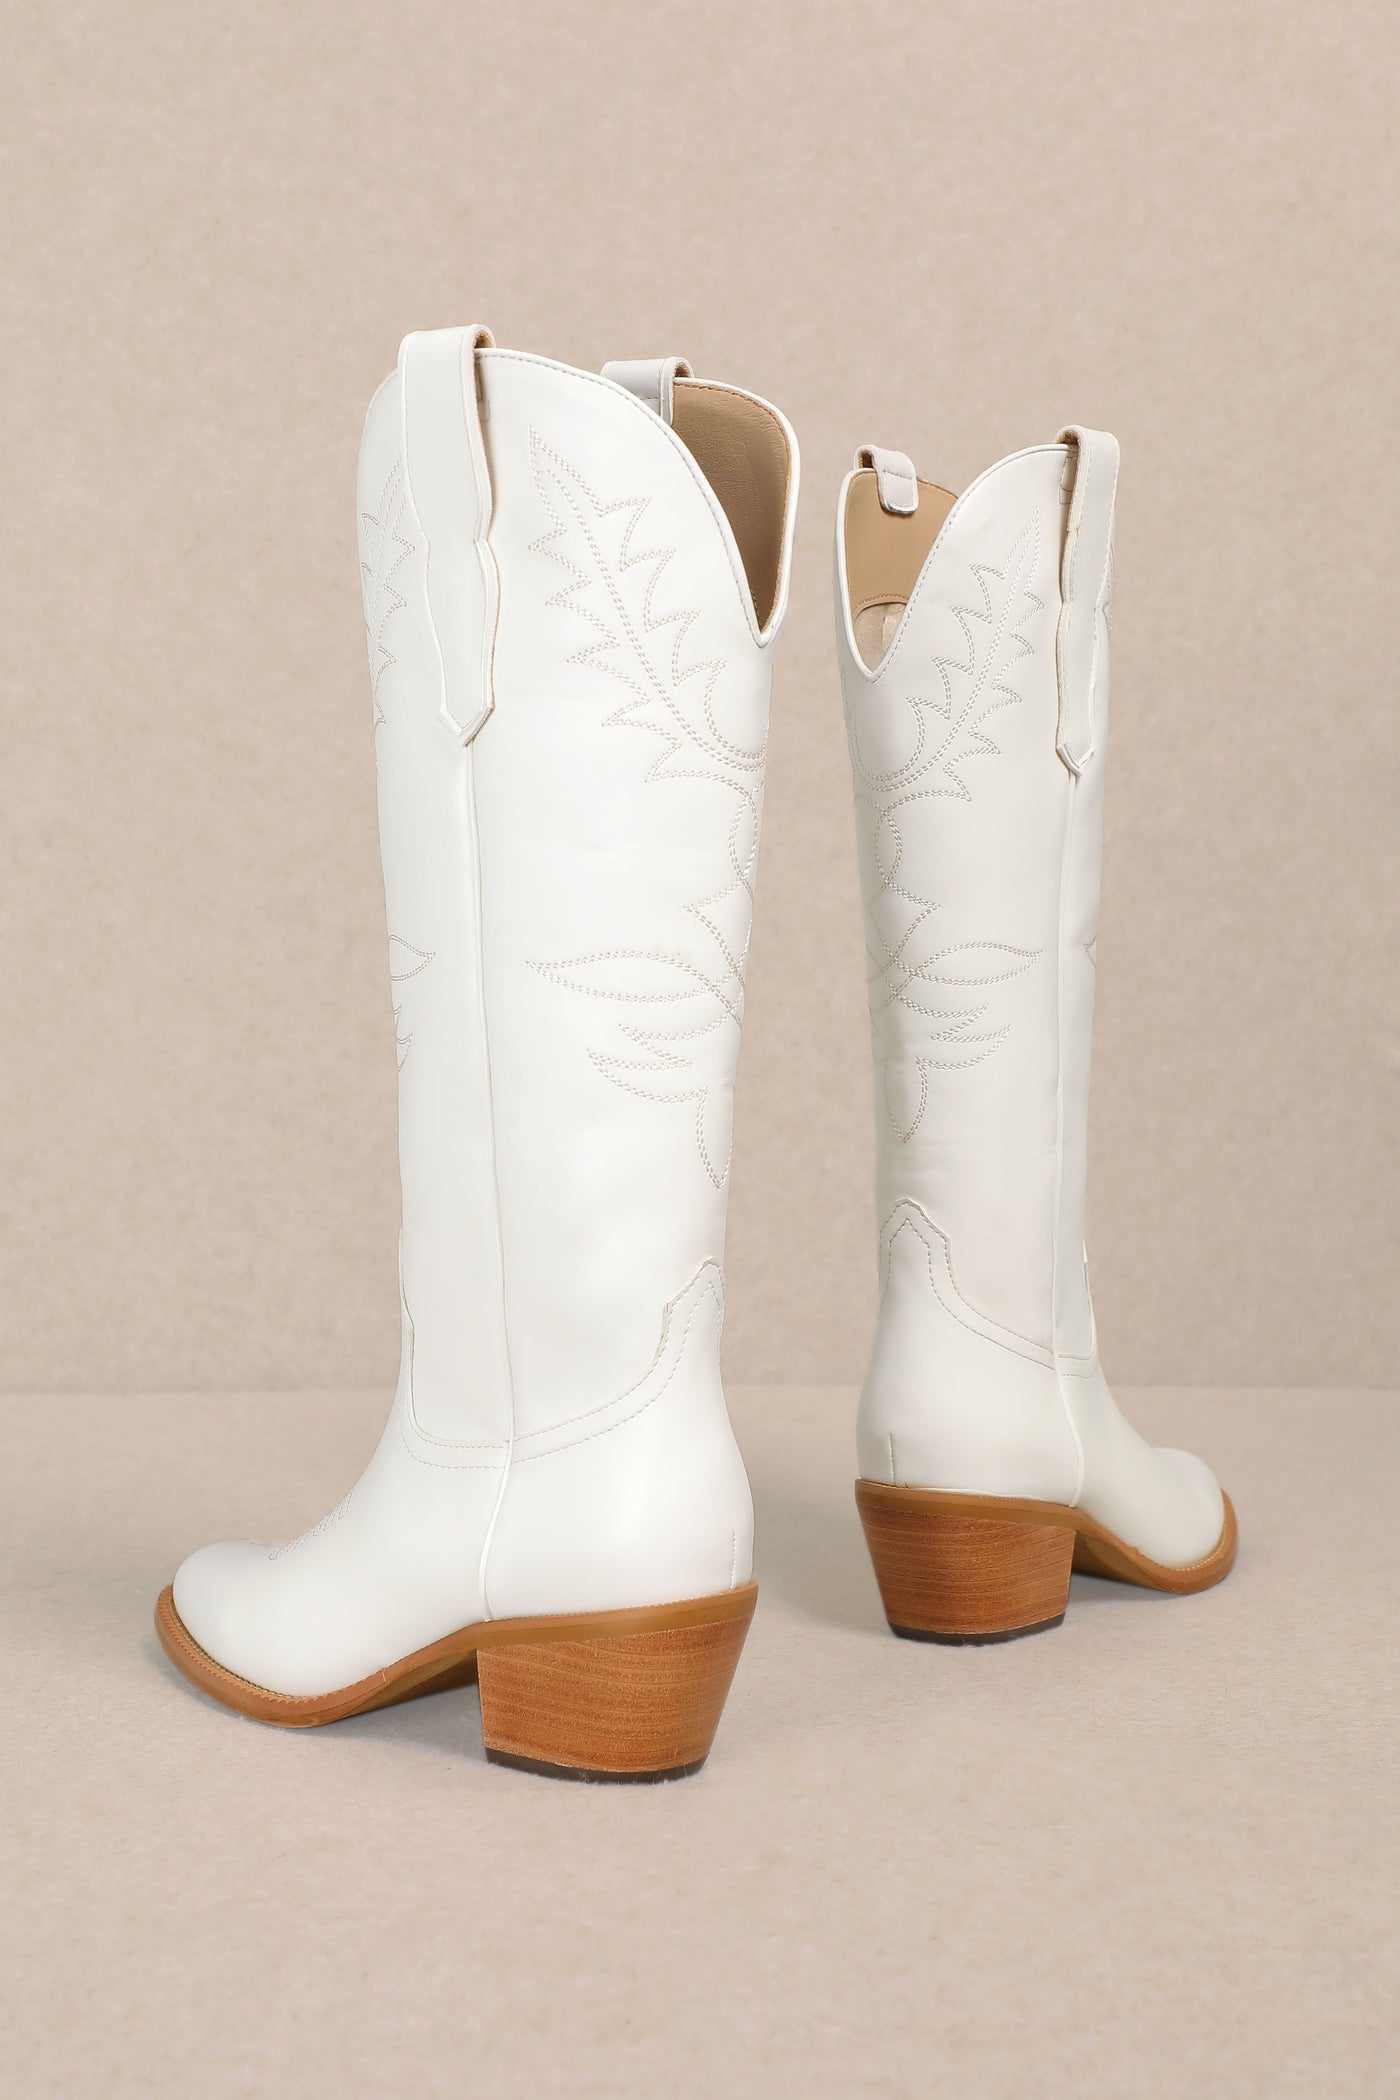 Adel Tall Cowgirl Boots - White